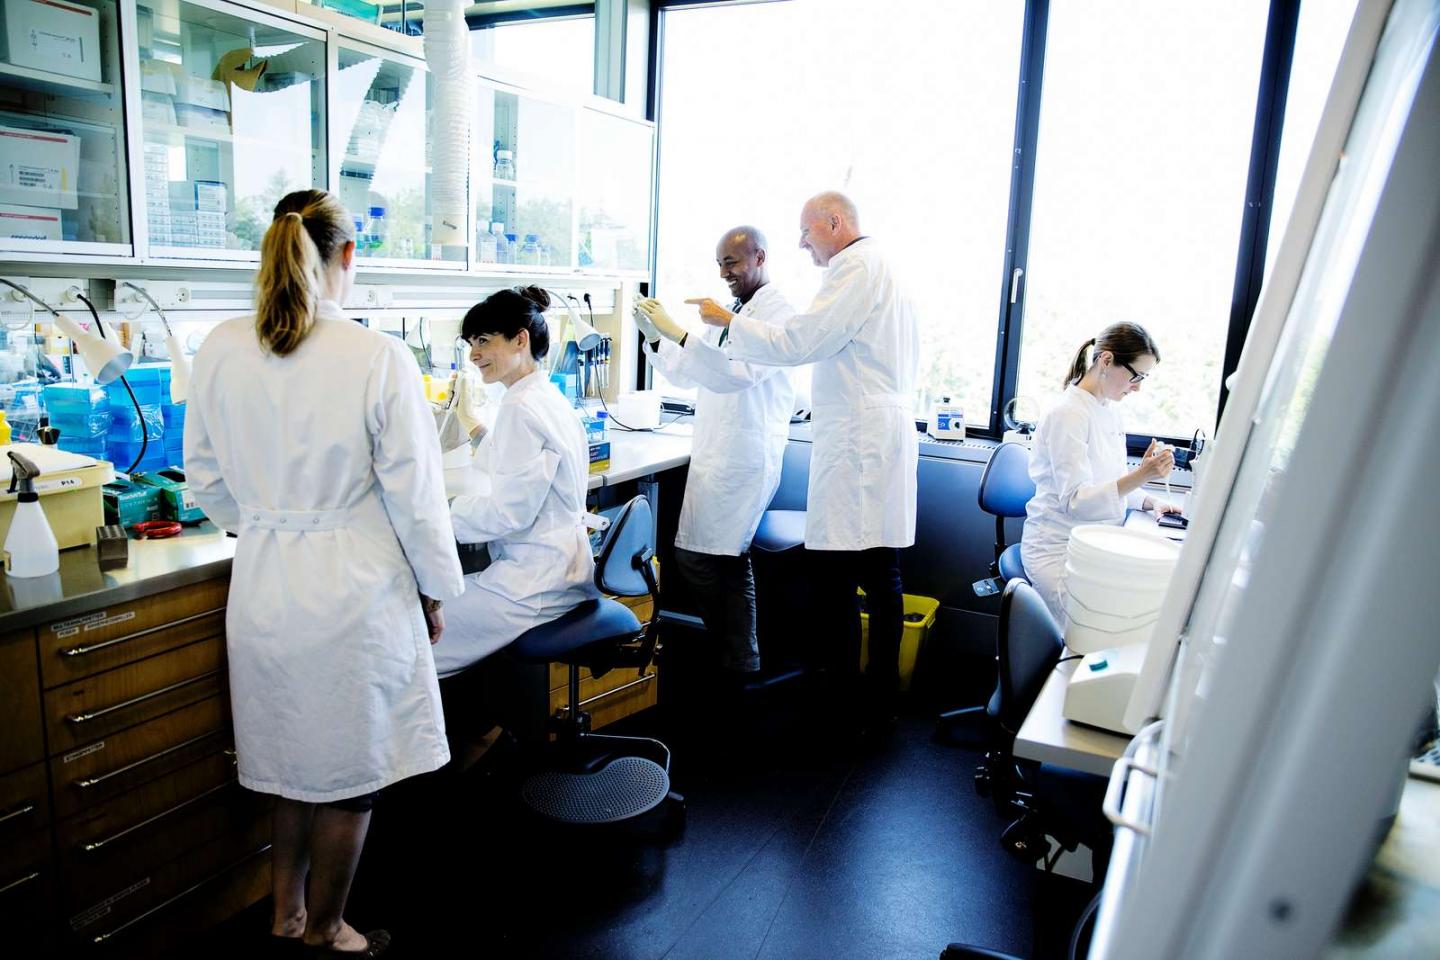 Professor Henrik Ditzel and His Research Team in the Laboratory